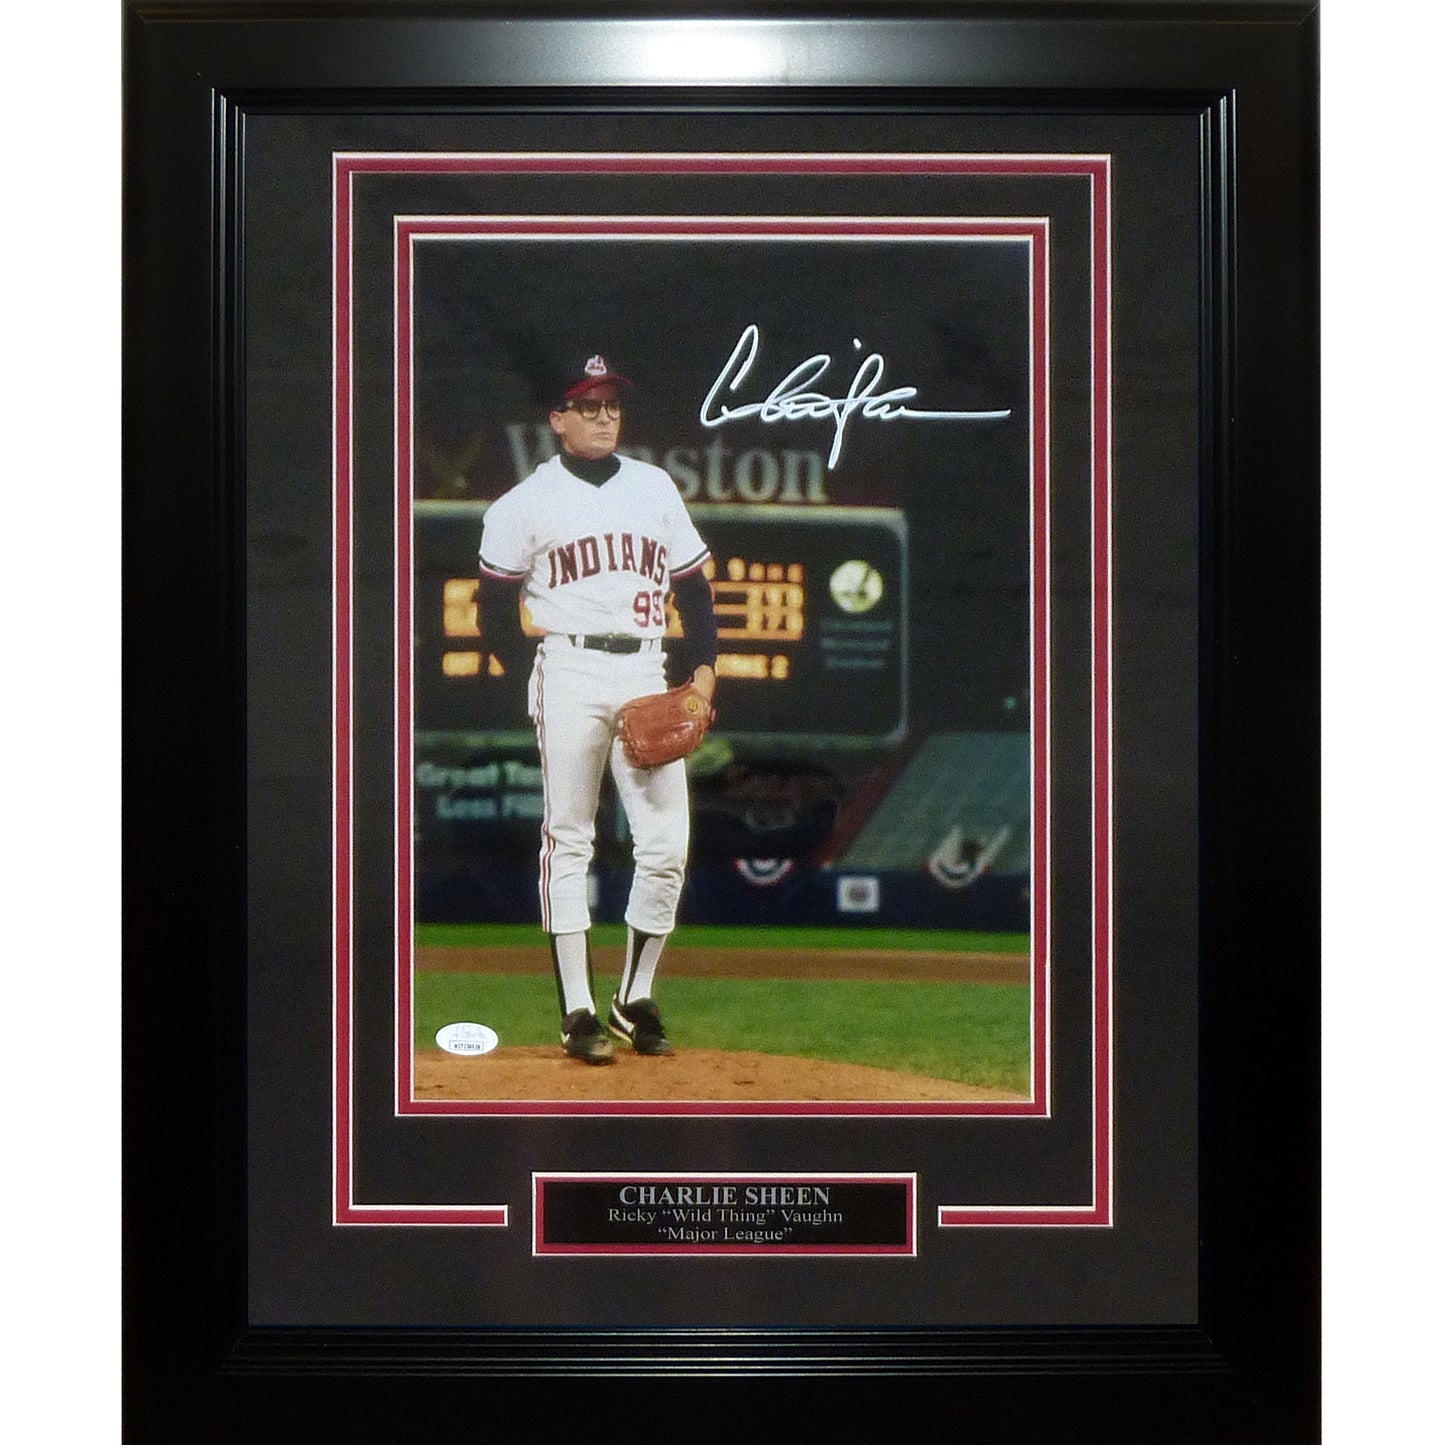 Charlie Sheen Autographed Major League (Wild Thing) Movie Deluxe Framed 11x14 Photo